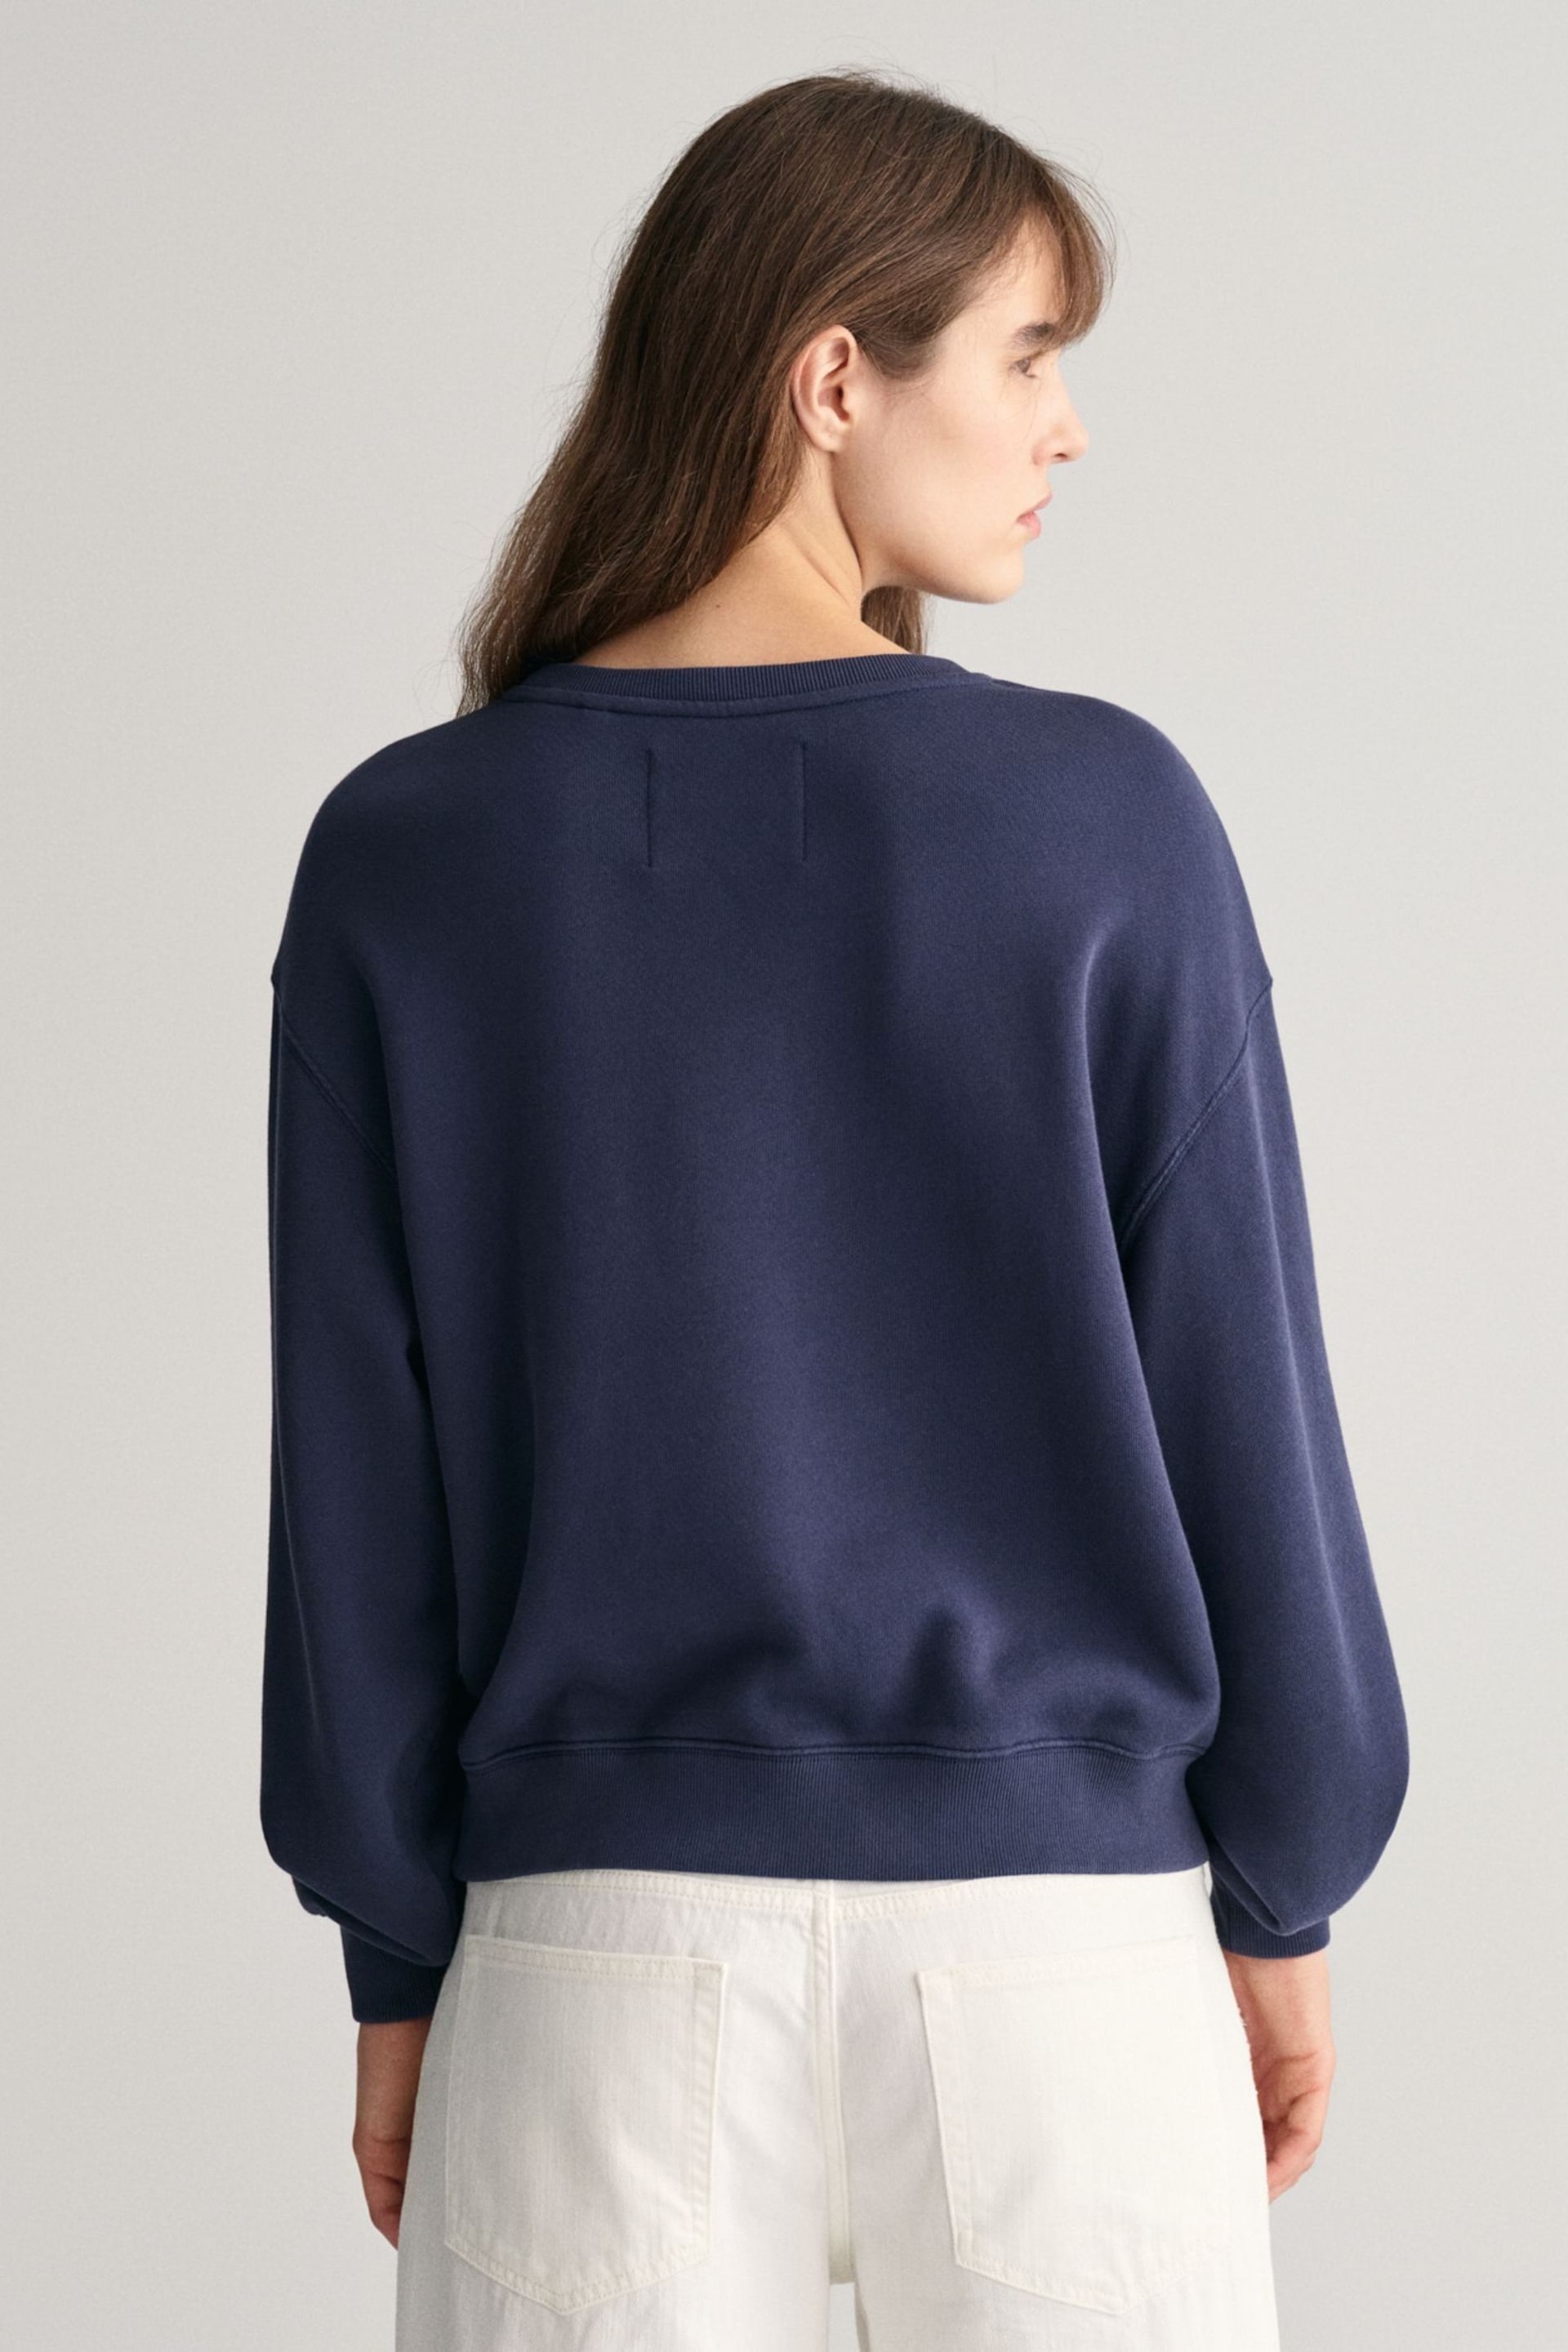 GANT Blue Relaxed Fit Embroidered Logo Sweatshirt - Image 2 of 6